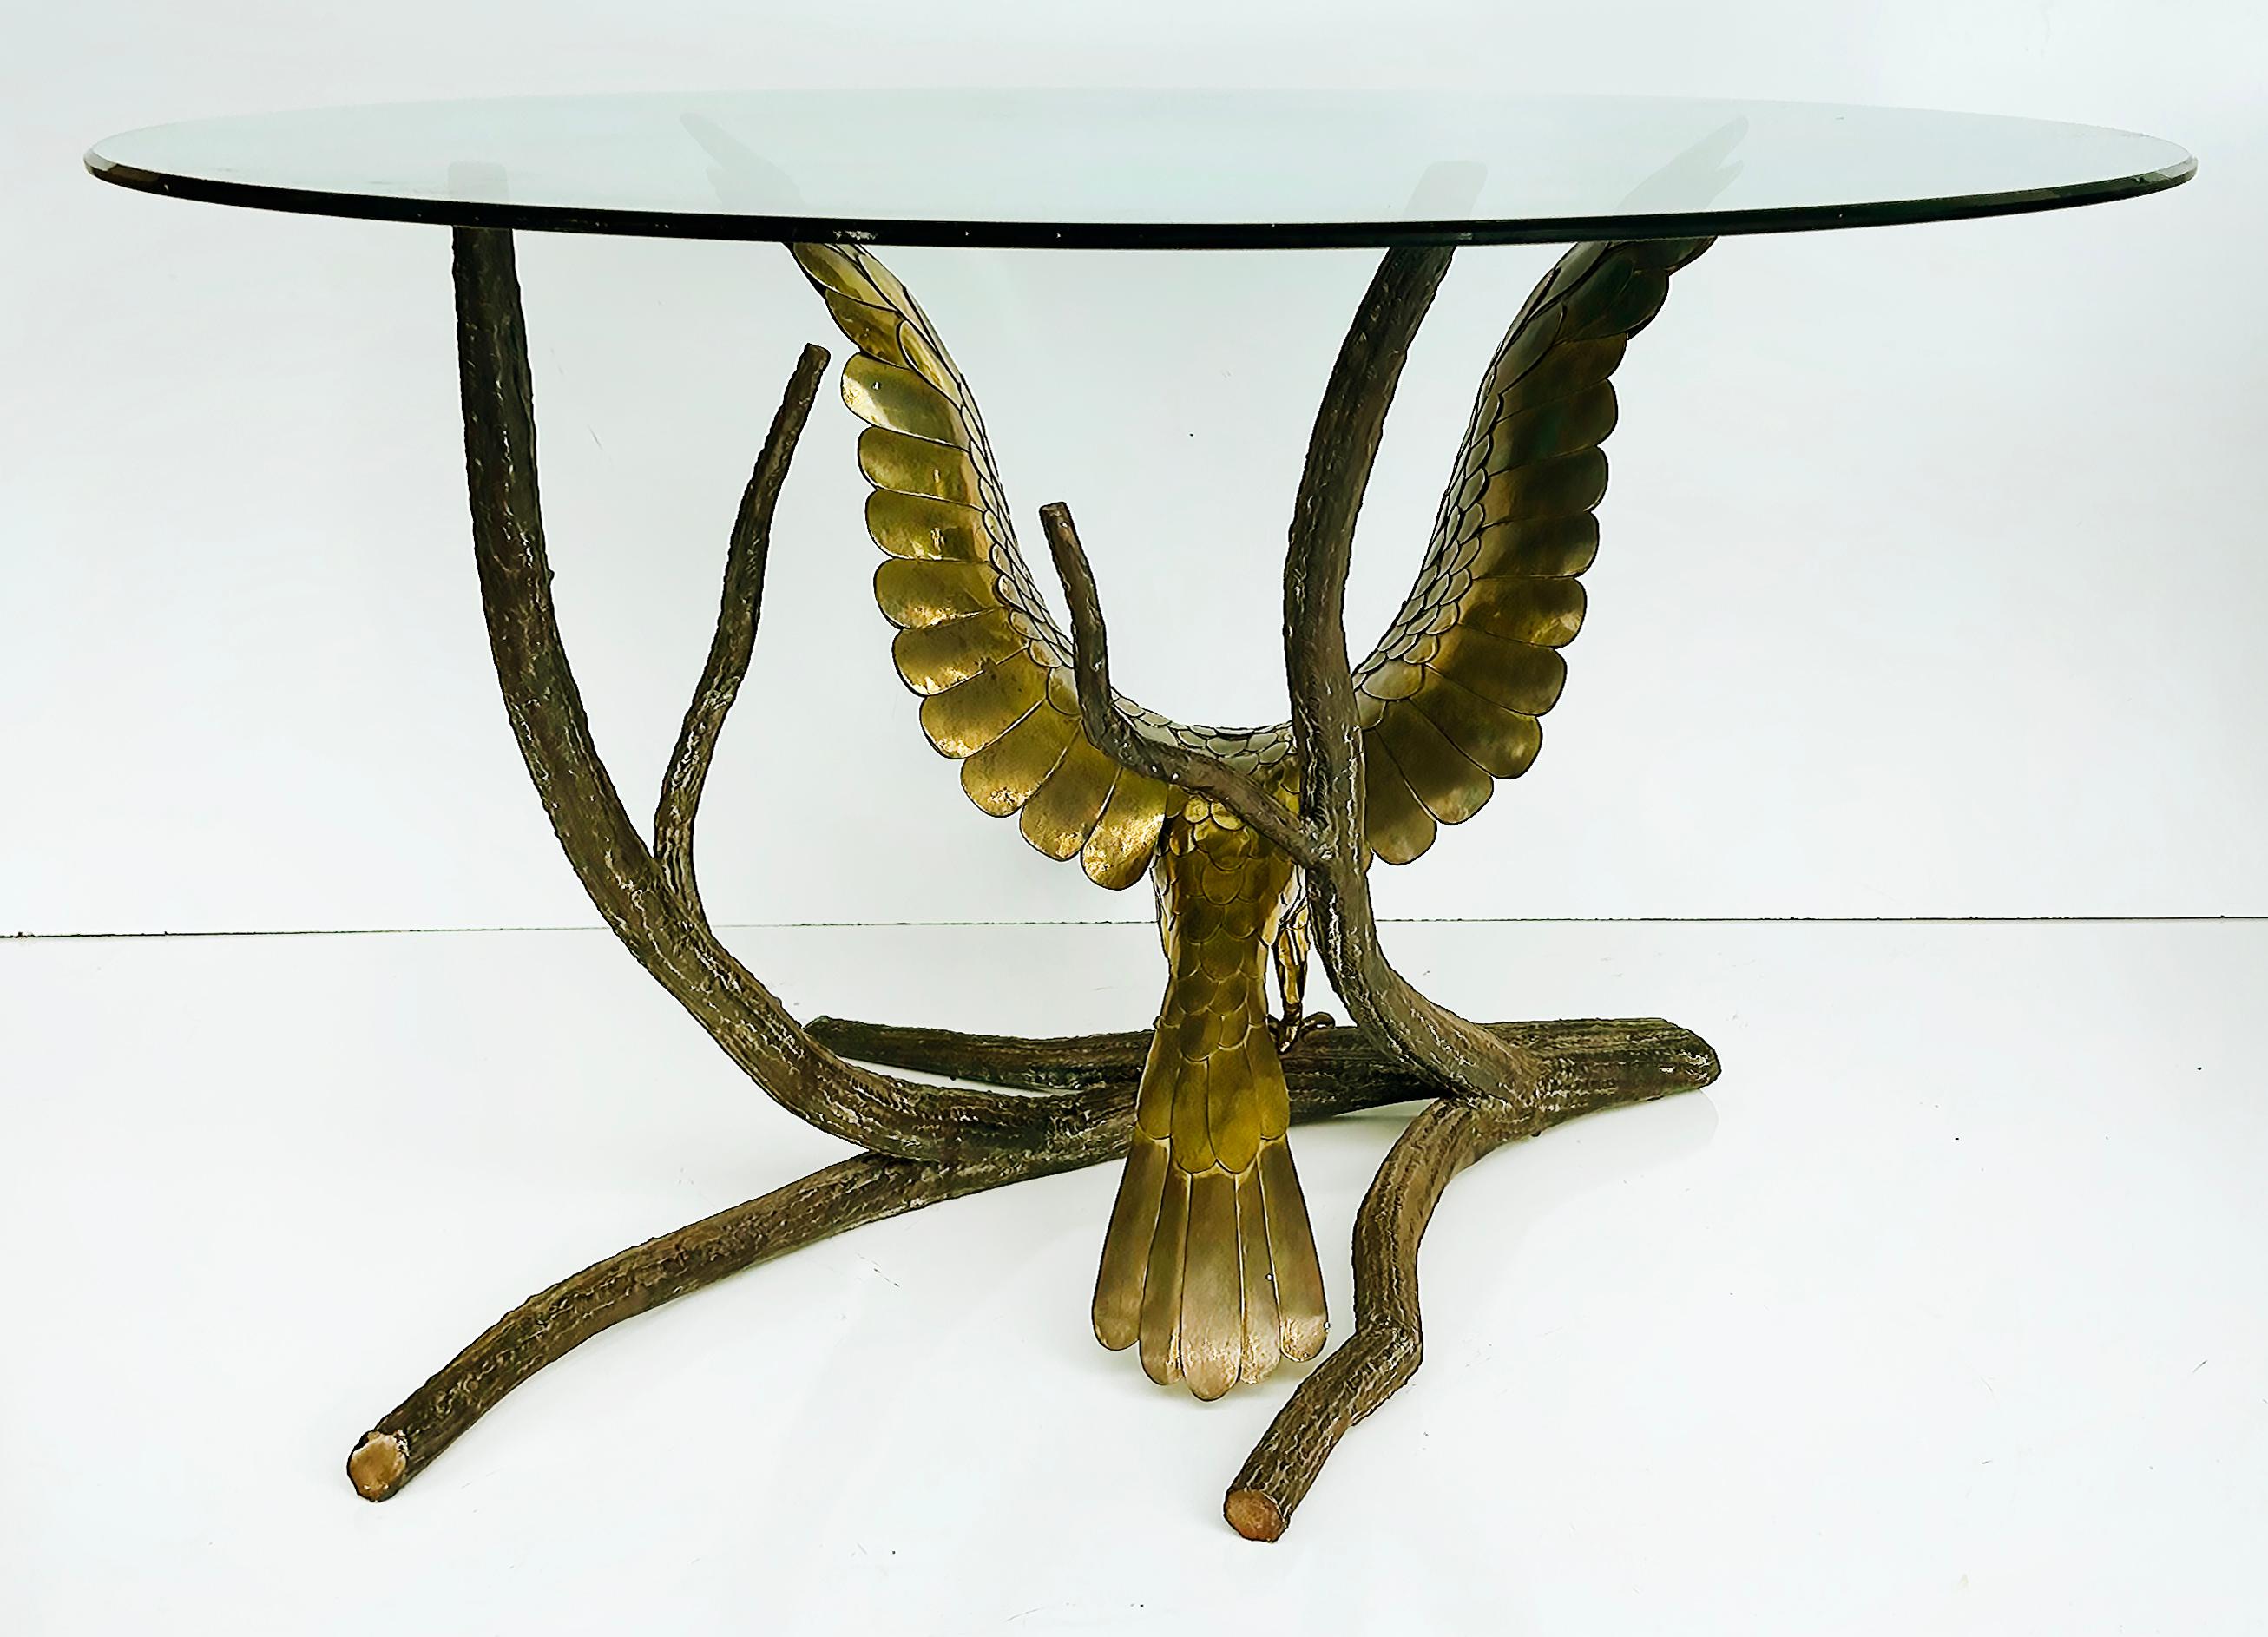  Alain Chervet French Sculptural Eagle Dining Center Table in Bronze and Brass For Sale 1